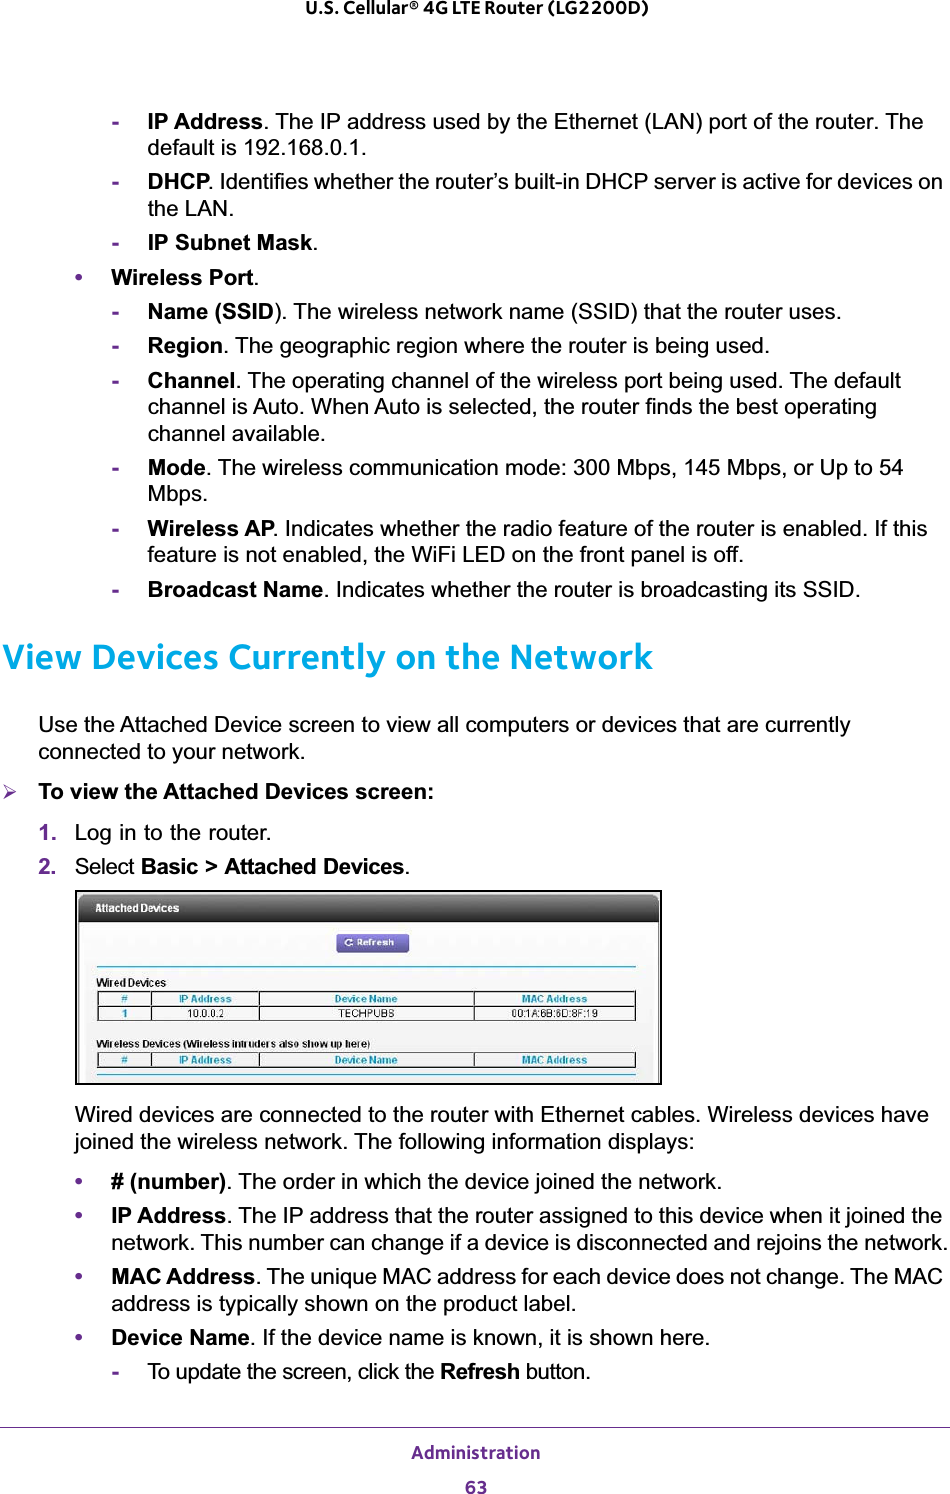 Administration63 U.S. Cellular® 4G LTE Router (LG2200D)-IP Address. The IP address used by the Ethernet (LAN) port of the router. The default is 192.168.0.1.-DHCP. Identifies whether the router’s built-in DHCP server is active for devices on the LAN.-IP Subnet Mask.•Wireless Port.-Name (SSID). The wireless network name (SSID) that the router uses.-Region.The geographic region where the router is being used. -Channel.The operating channel of the wireless port being used. The default channel is Auto. When Auto is selected, the router finds the best operating channel available.-Mode. The wireless communication mode: 300 Mbps, 145 Mbps, or Up to 54 Mbps.-Wireless AP. Indicates whether the radio feature of the router is enabled. If this feature is not enabled, the WiFi LED on the front panel is off.-Broadcast Name. Indicates whether the router is broadcasting its SSID.View Devices Currently on the NetworkUse the Attached Device screen to view all computers or devices that are currently connected to your network.¾To view the Attached Devices screen:1. Log in to the router.2. Select Basic &gt; Attached Devices.Wired devices are connected to the router with Ethernet cables. Wireless devices have joined the wireless network. The following information displays:•# (number). The order in which the device joined the network.•IP Address.The IP address that the router assigned to this device when it joined the network. This number can change if a device is disconnected and rejoins the network.•MAC Address.The unique MAC address for each device does not change. The MAC address is typically shown on the product label.•Device Name. If the device name is known, it is shown here. -To update the screen, click the Refresh button.